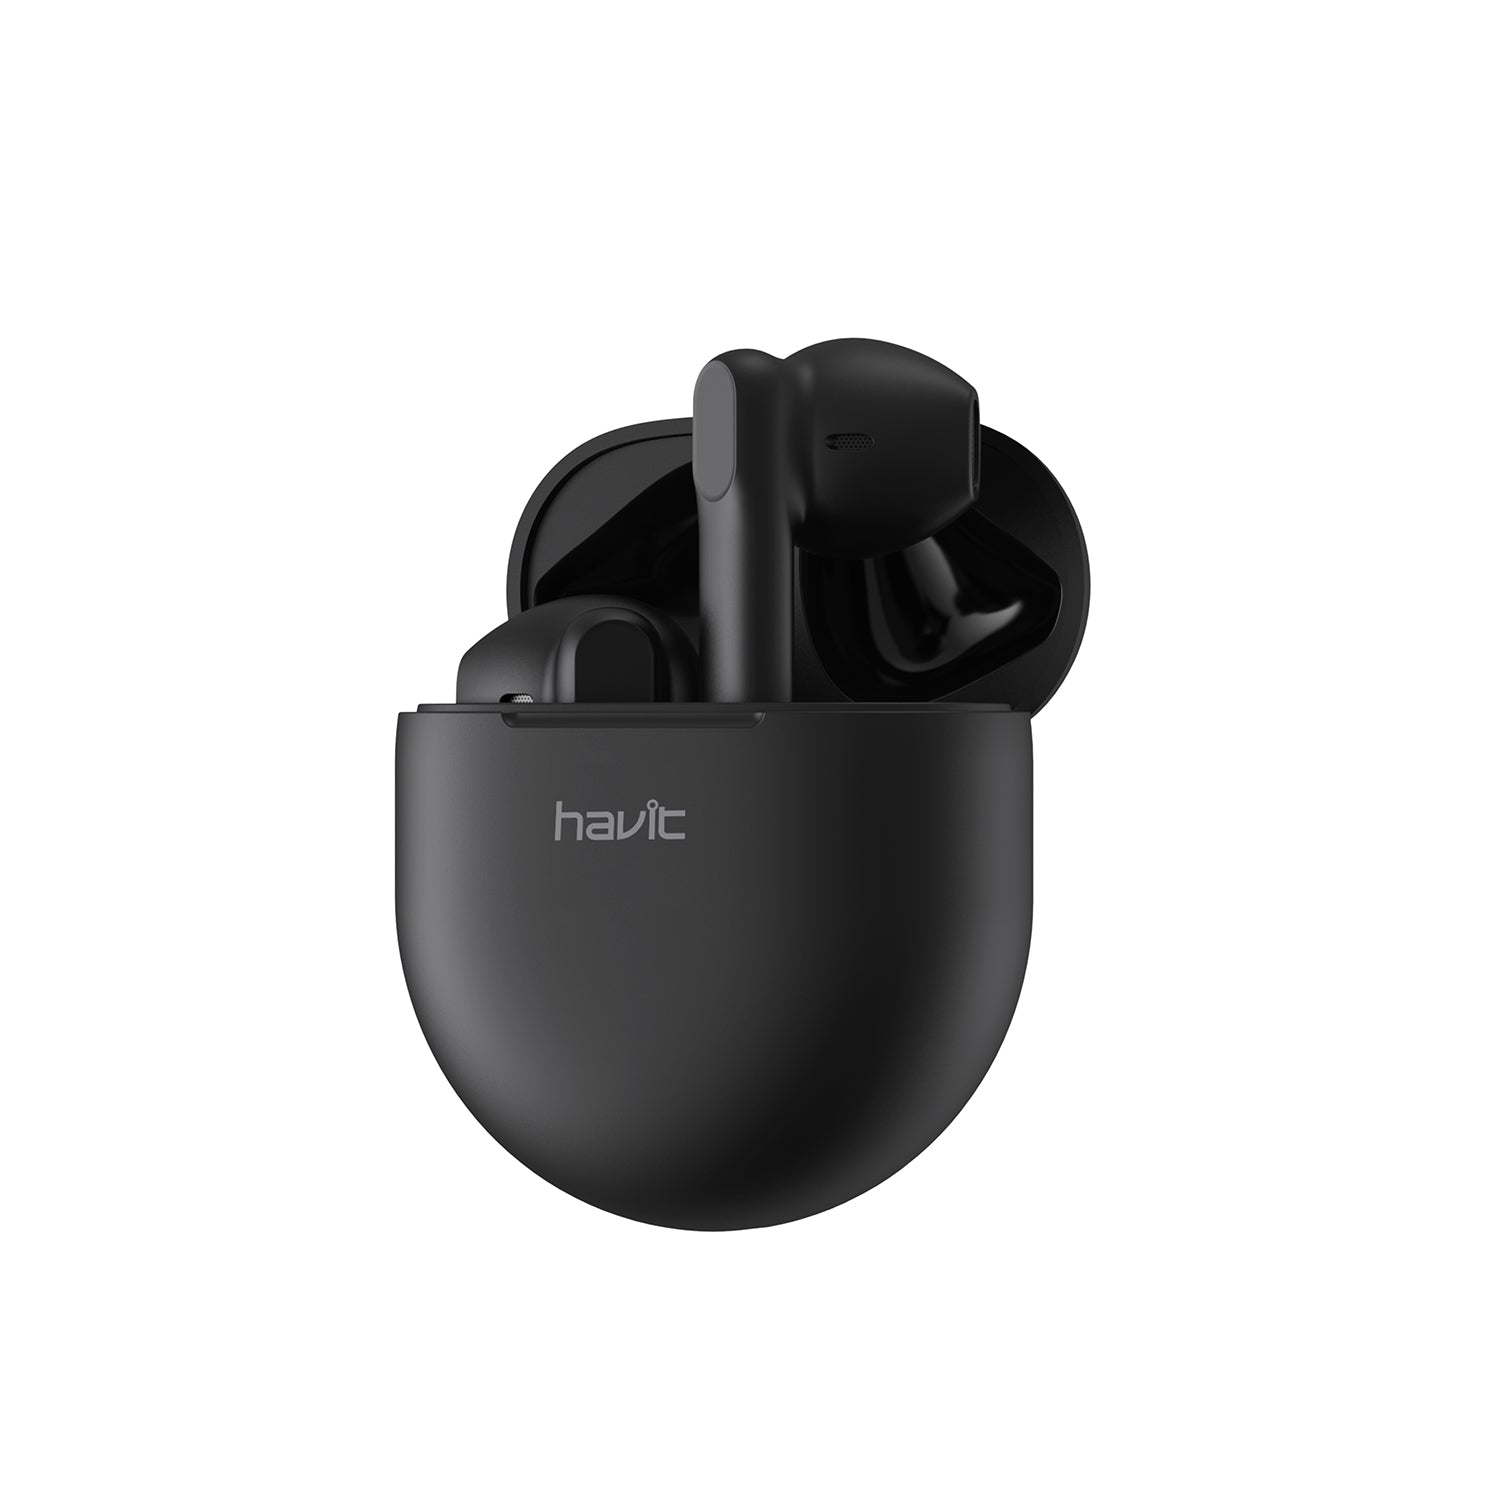 HAVIT TW916 True Wireless Earbuds with Smart Touch Control & Voice Assistant